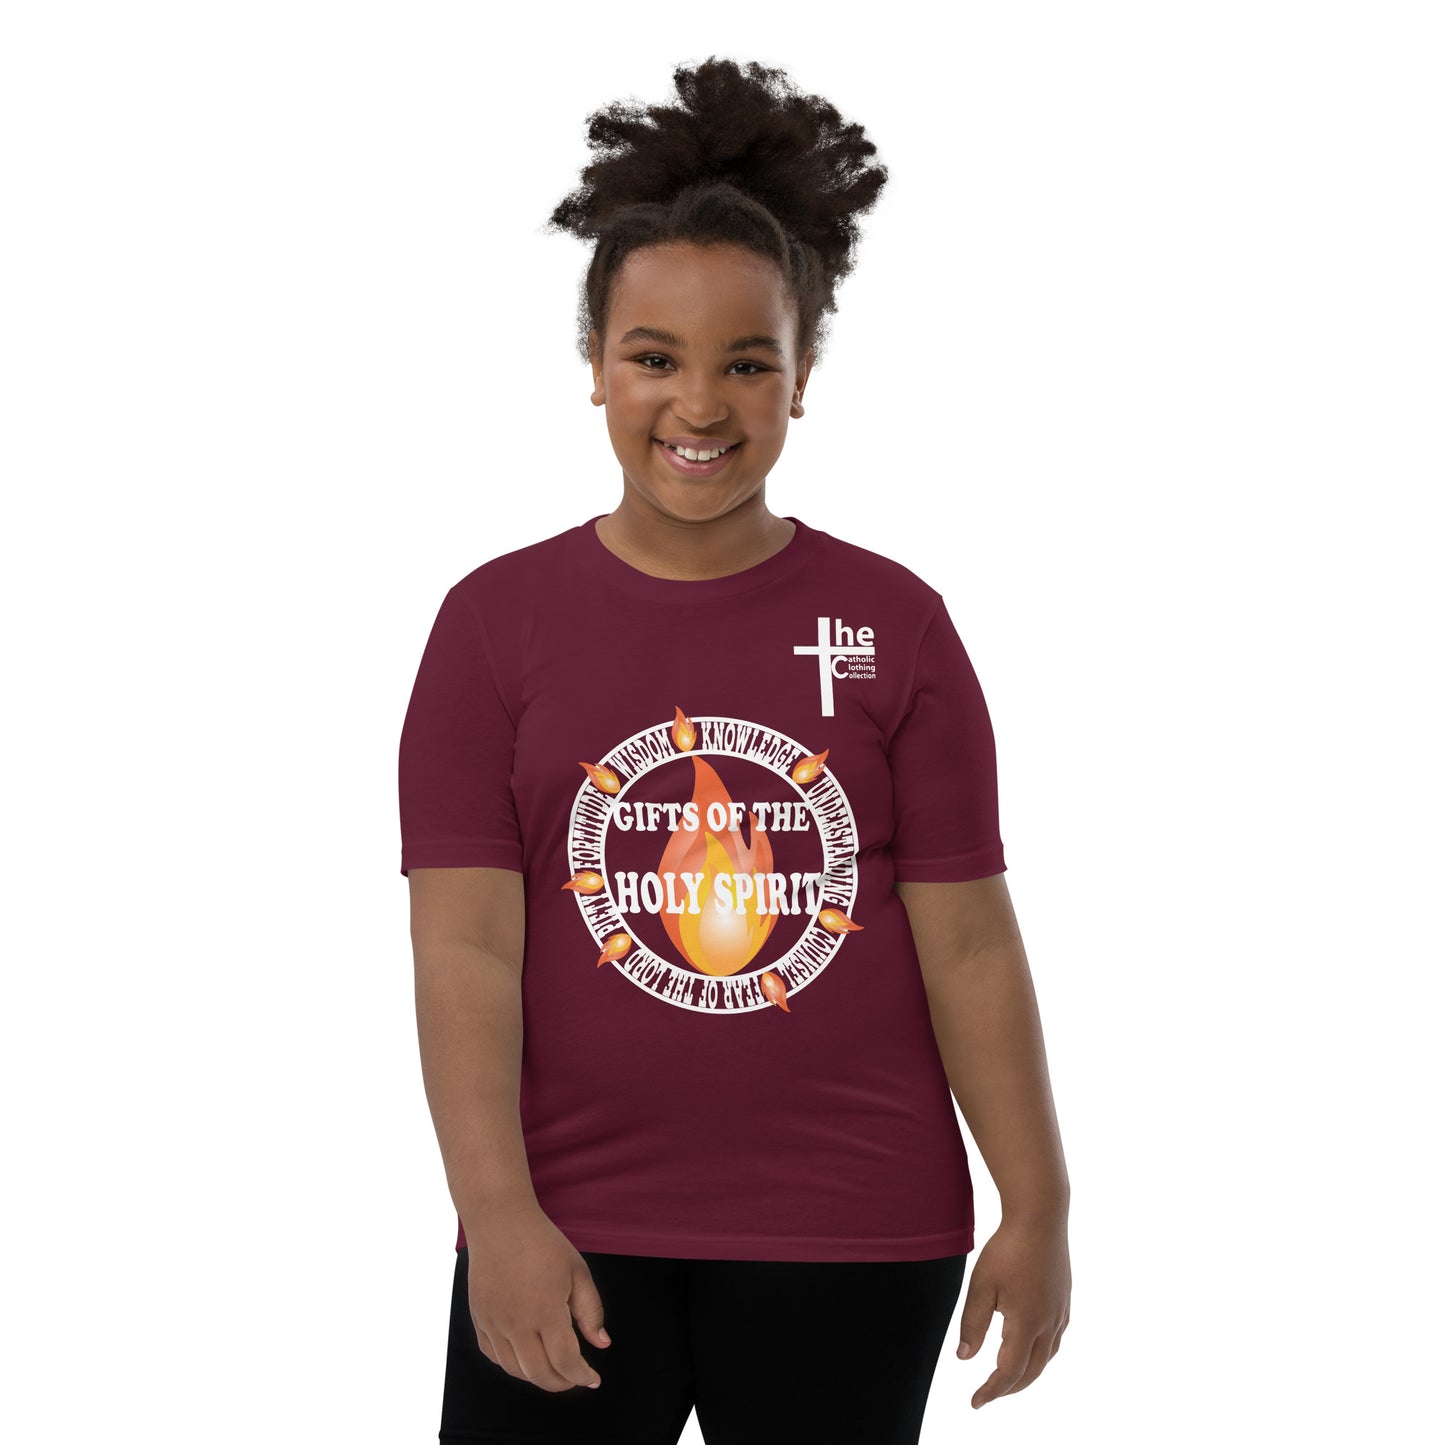 Gifts of the Holy Spirit Children's t-Shirt